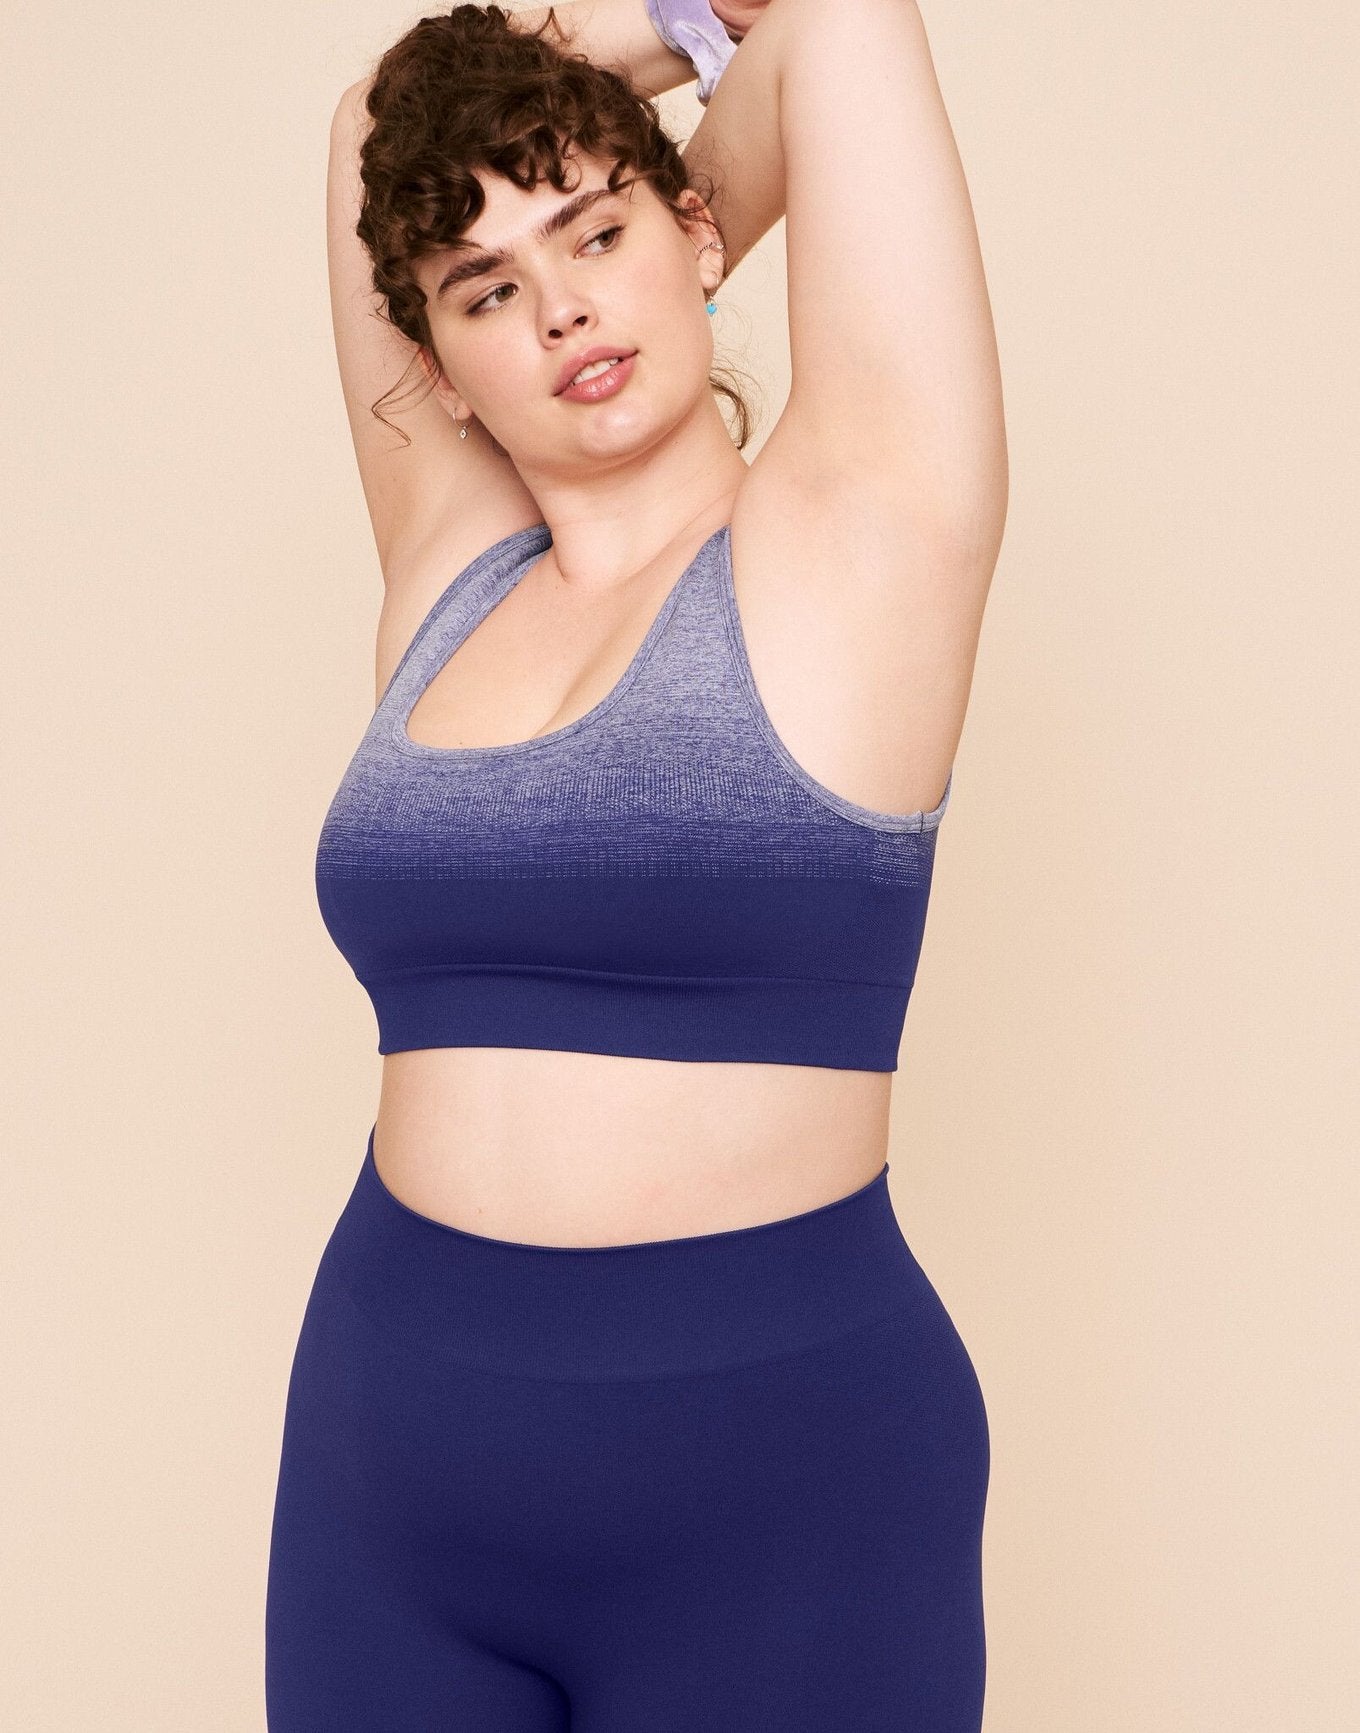 Earth Republic Maeve Ombre Sports Bra Sports Bra in color Solid 02 - Ombre Navy and shape sports bra